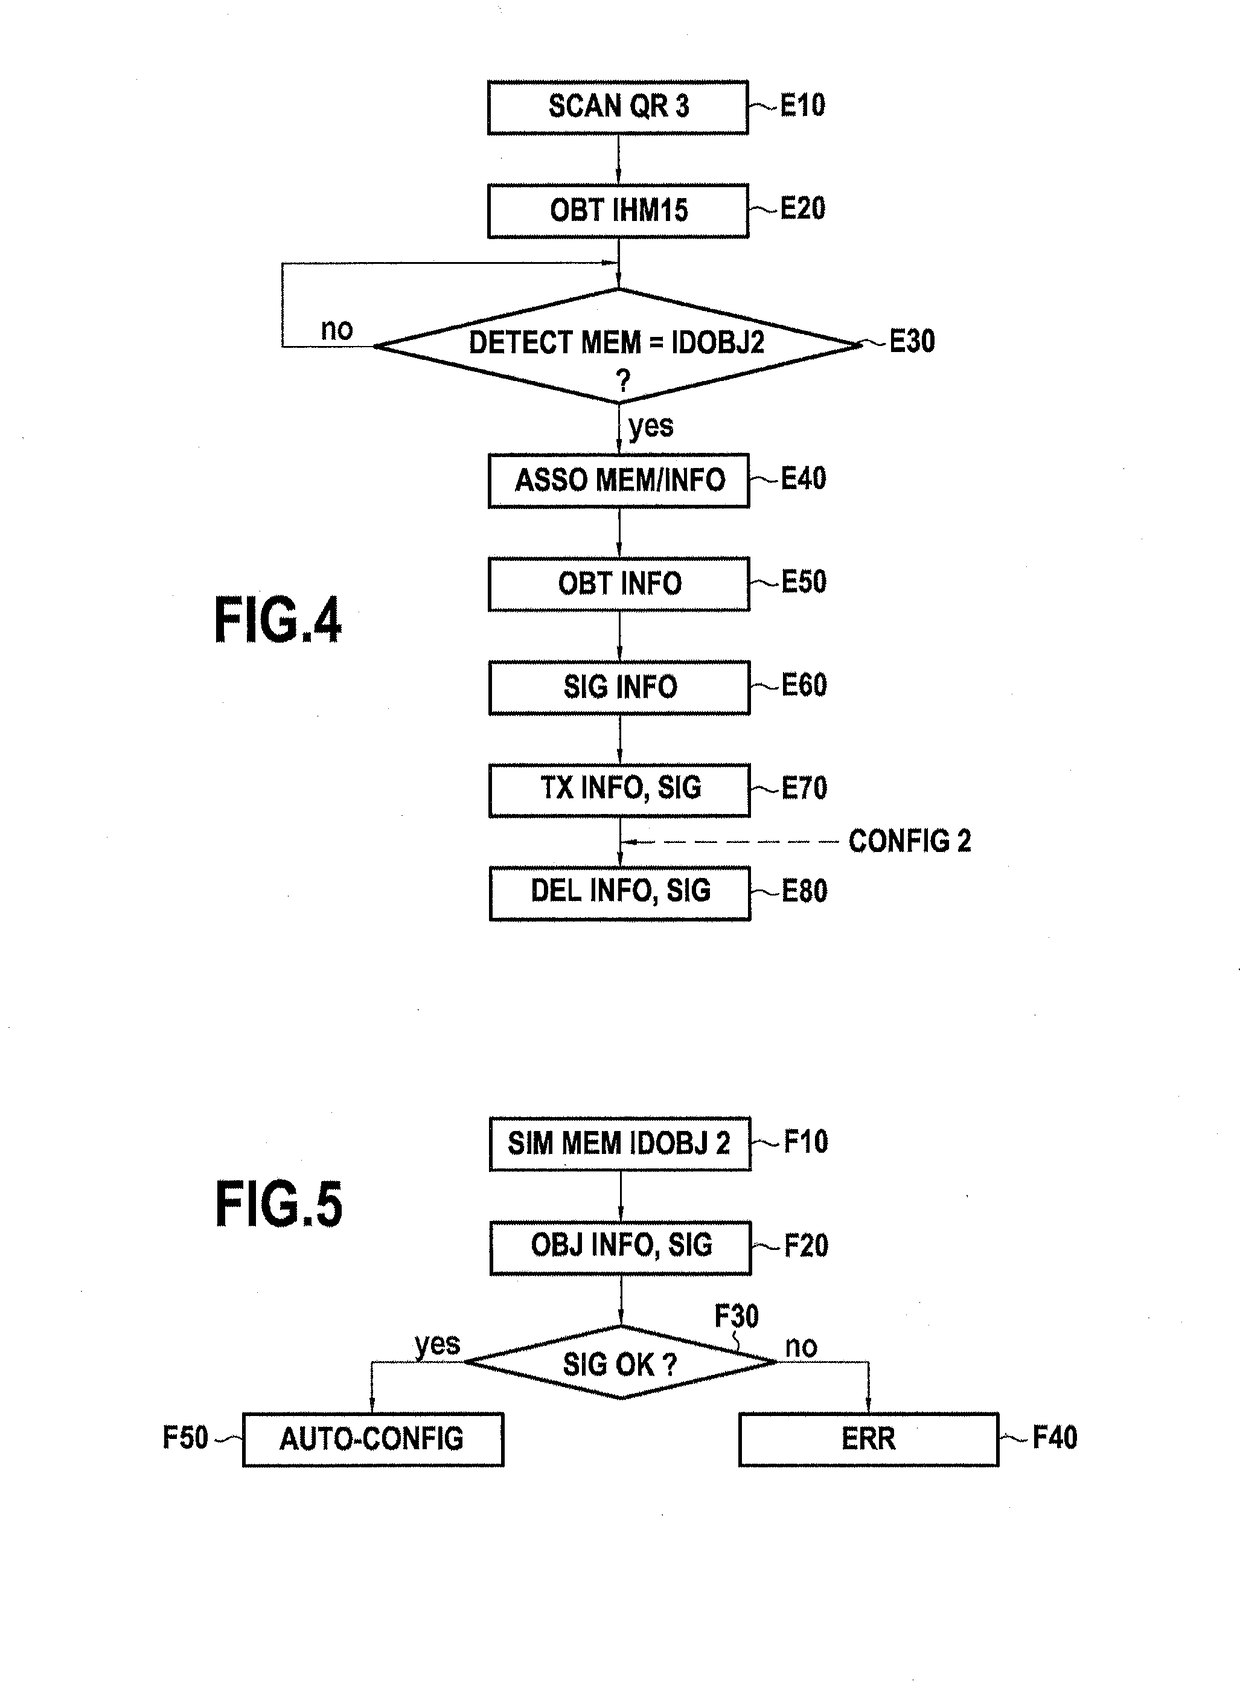 Method of transferring configuration information for a connected object